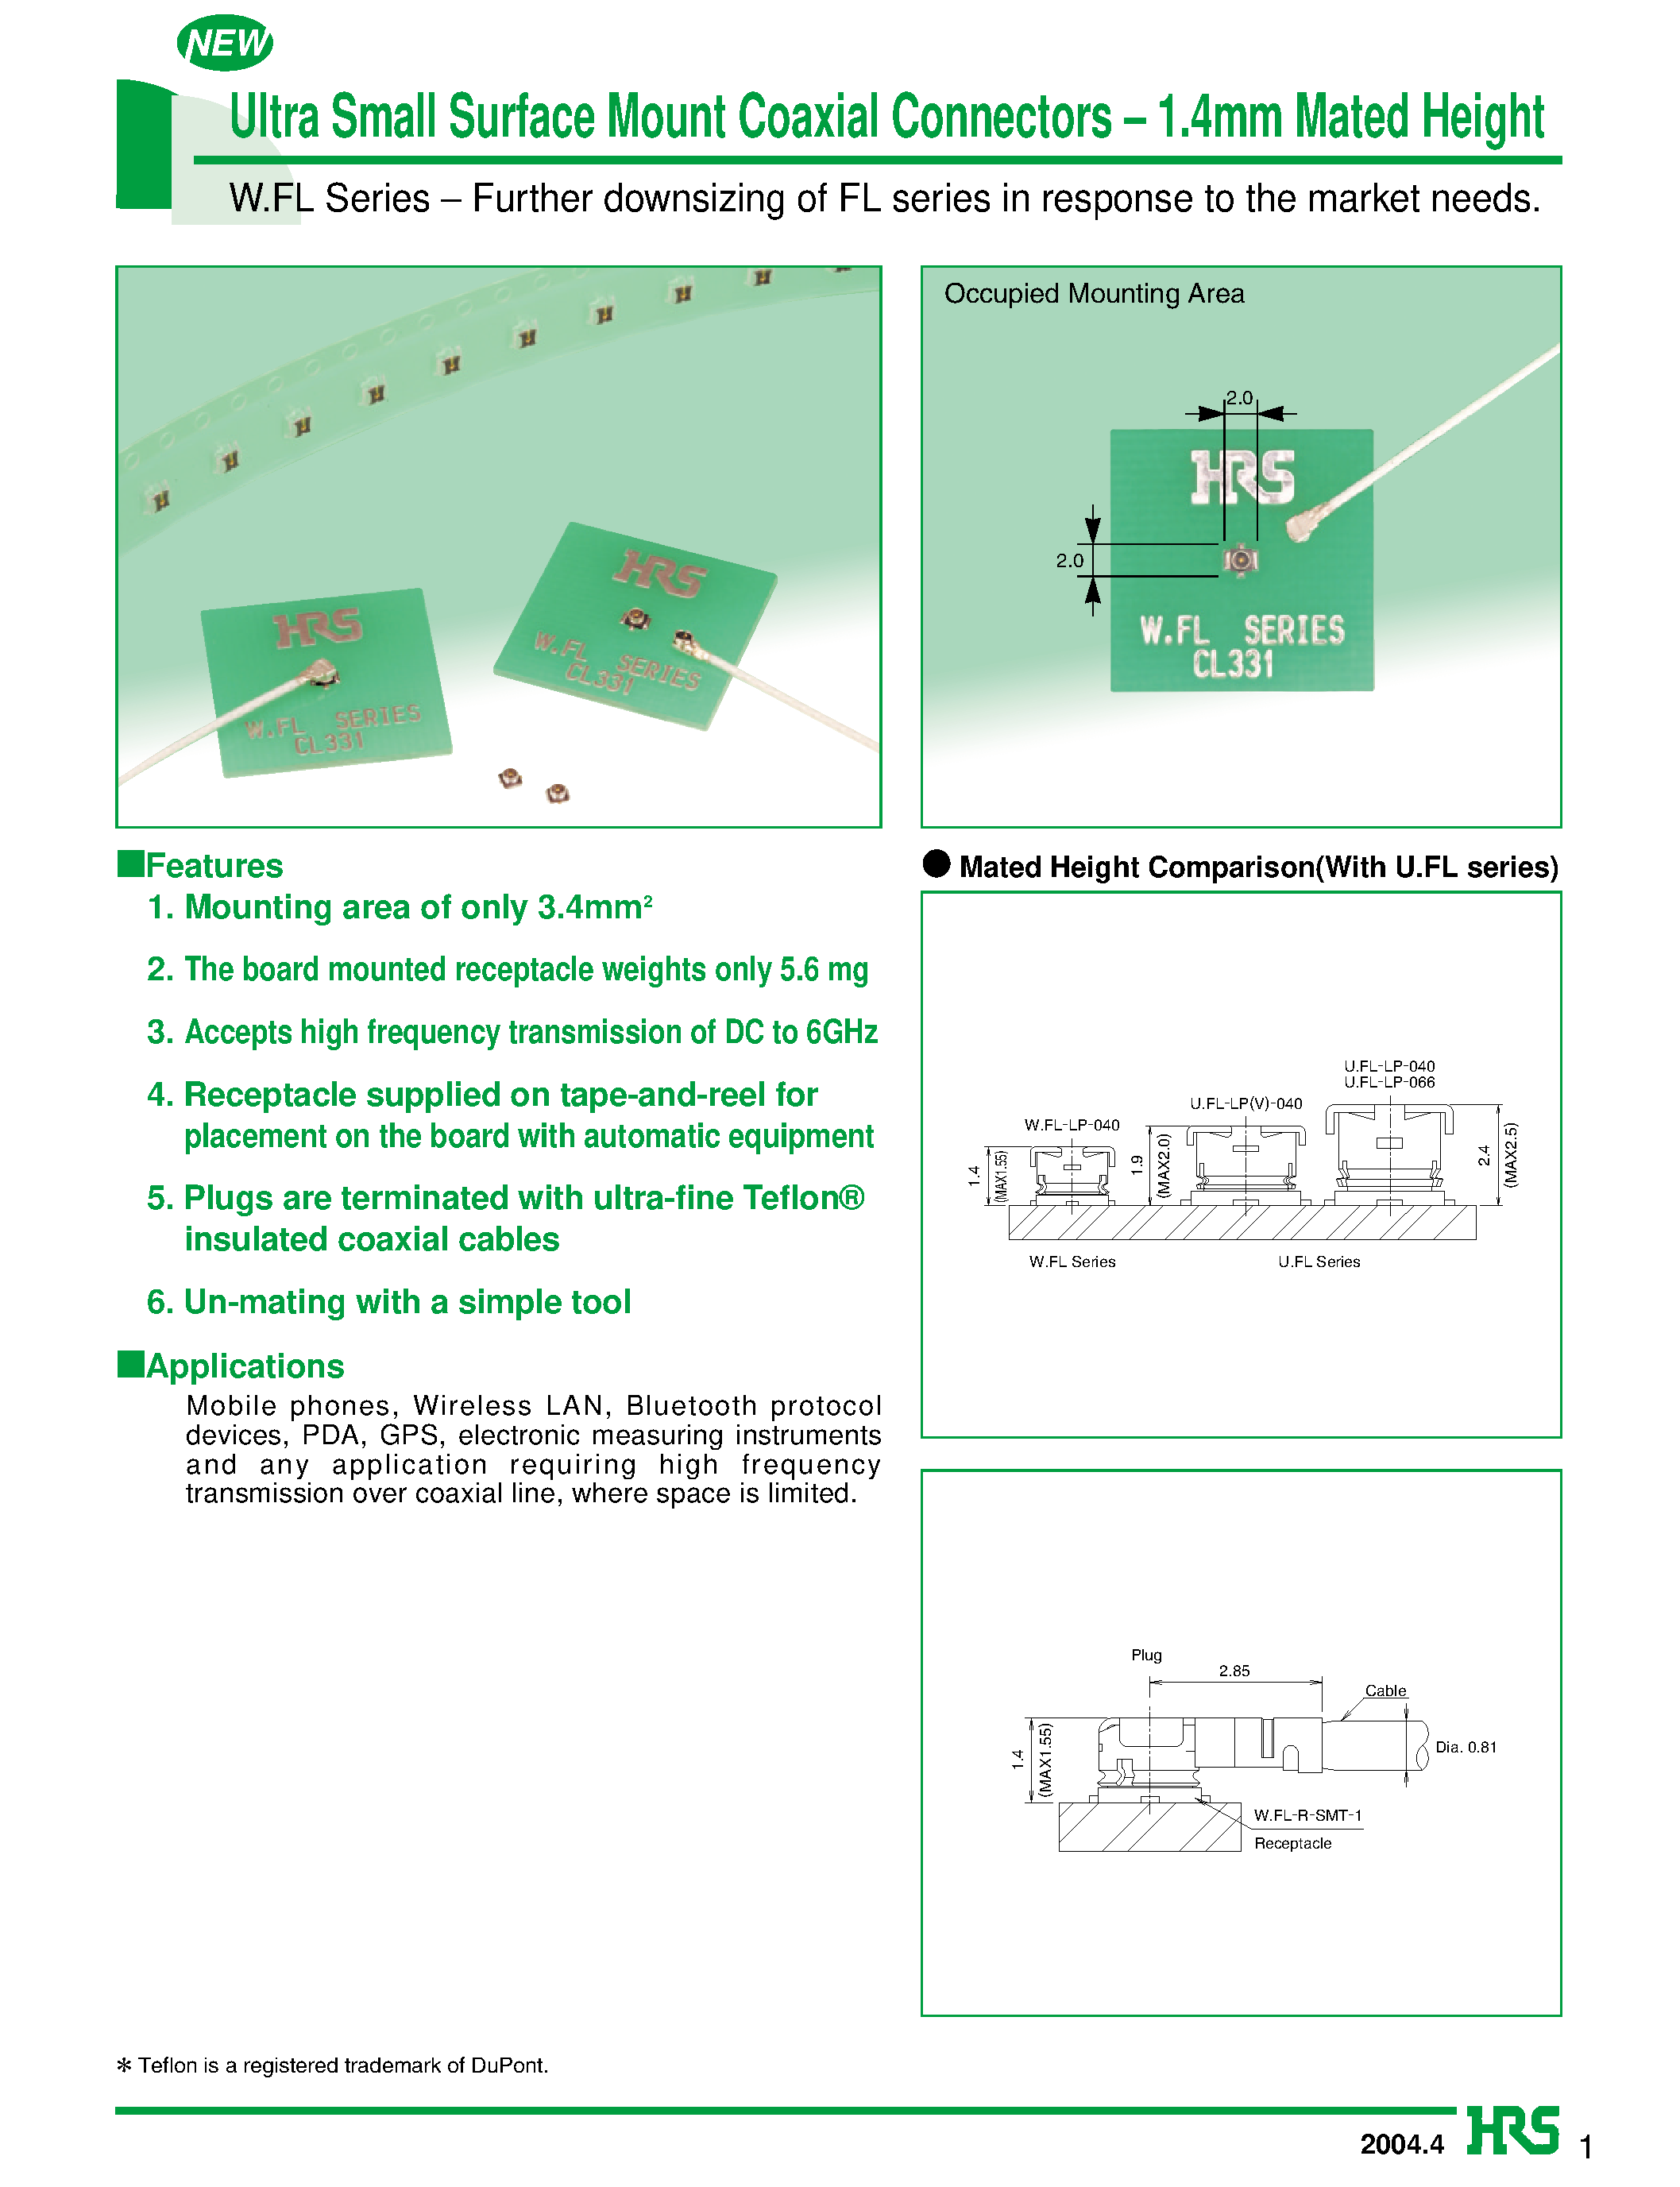 Datasheet W.FL-R-SMT-1(10) - Ultra Small Surface Mount Coaxial Connectors - 1.4mm Mated Height page 1